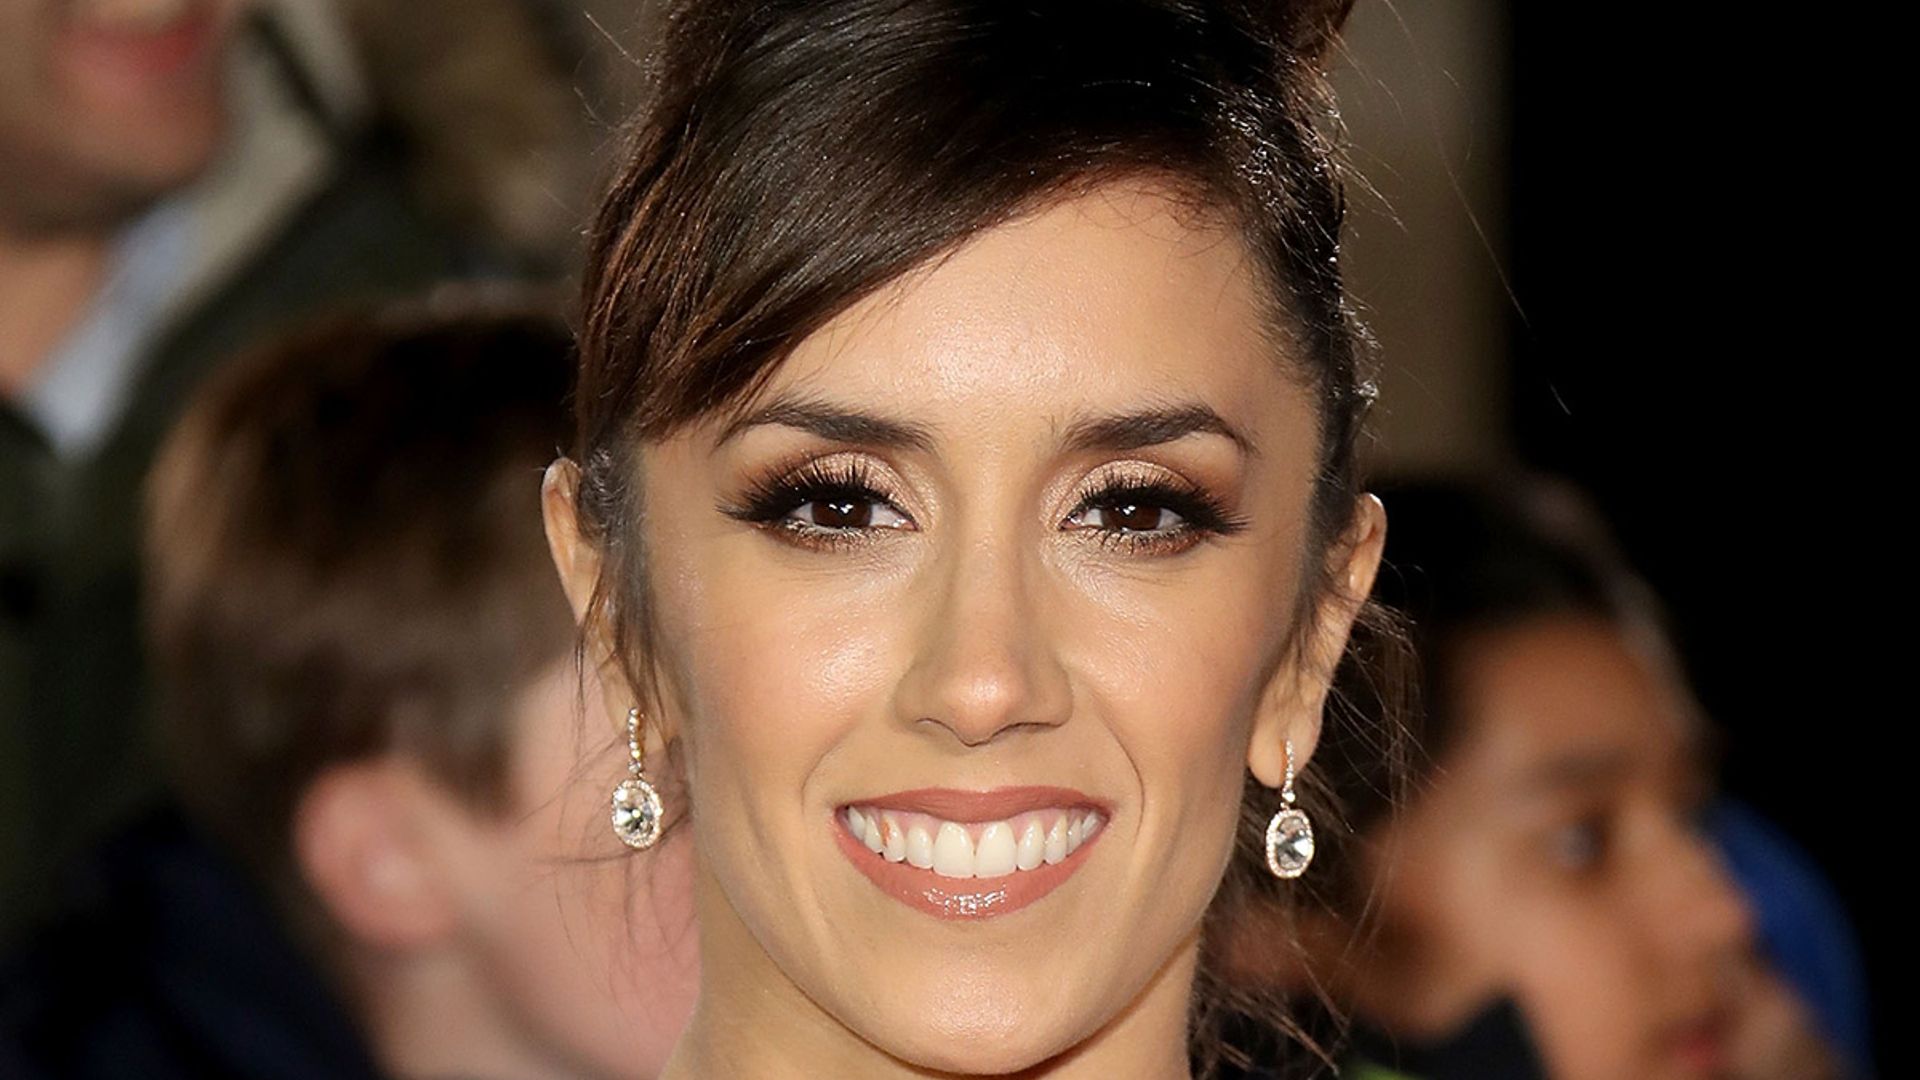 Janette Manrara shares adorable bathtime photo – and fans are in love